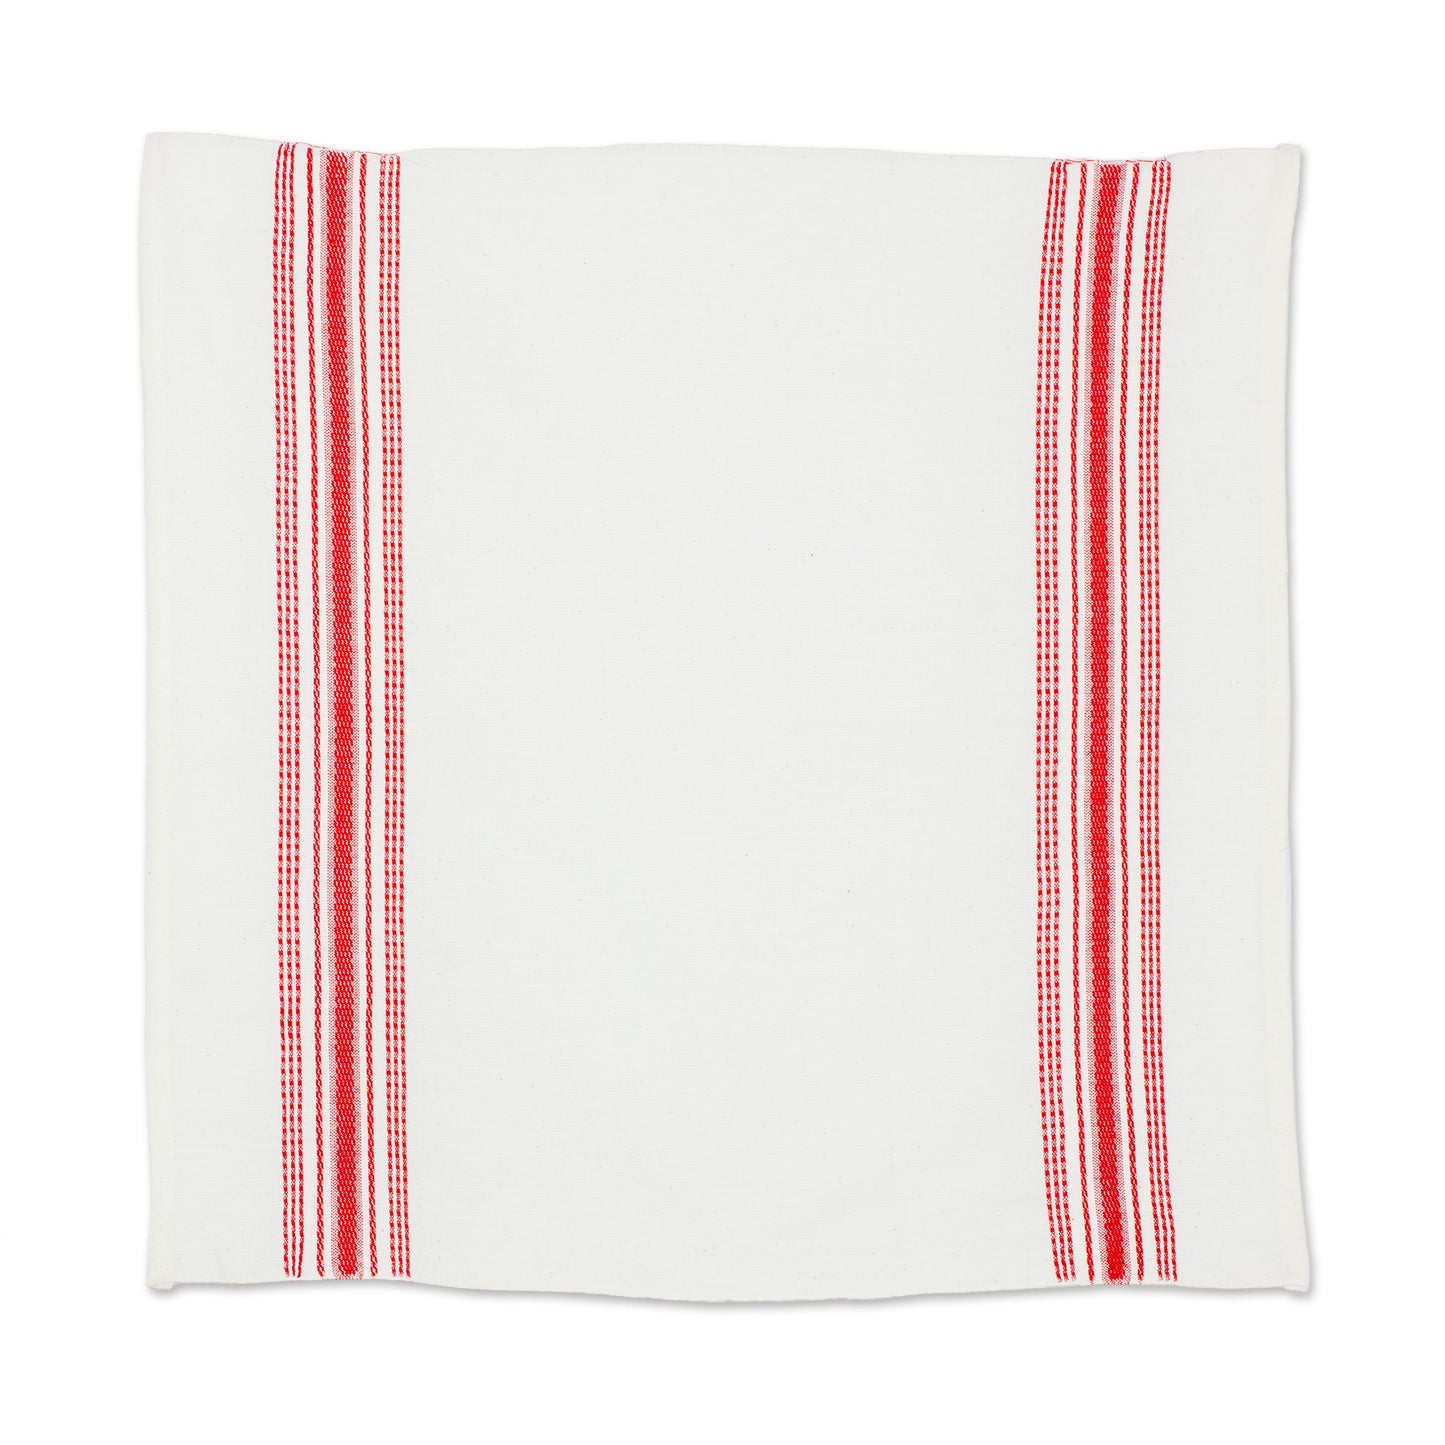 Peaceful Lines Red and White Striped Cotton Napkins (Set of 6)